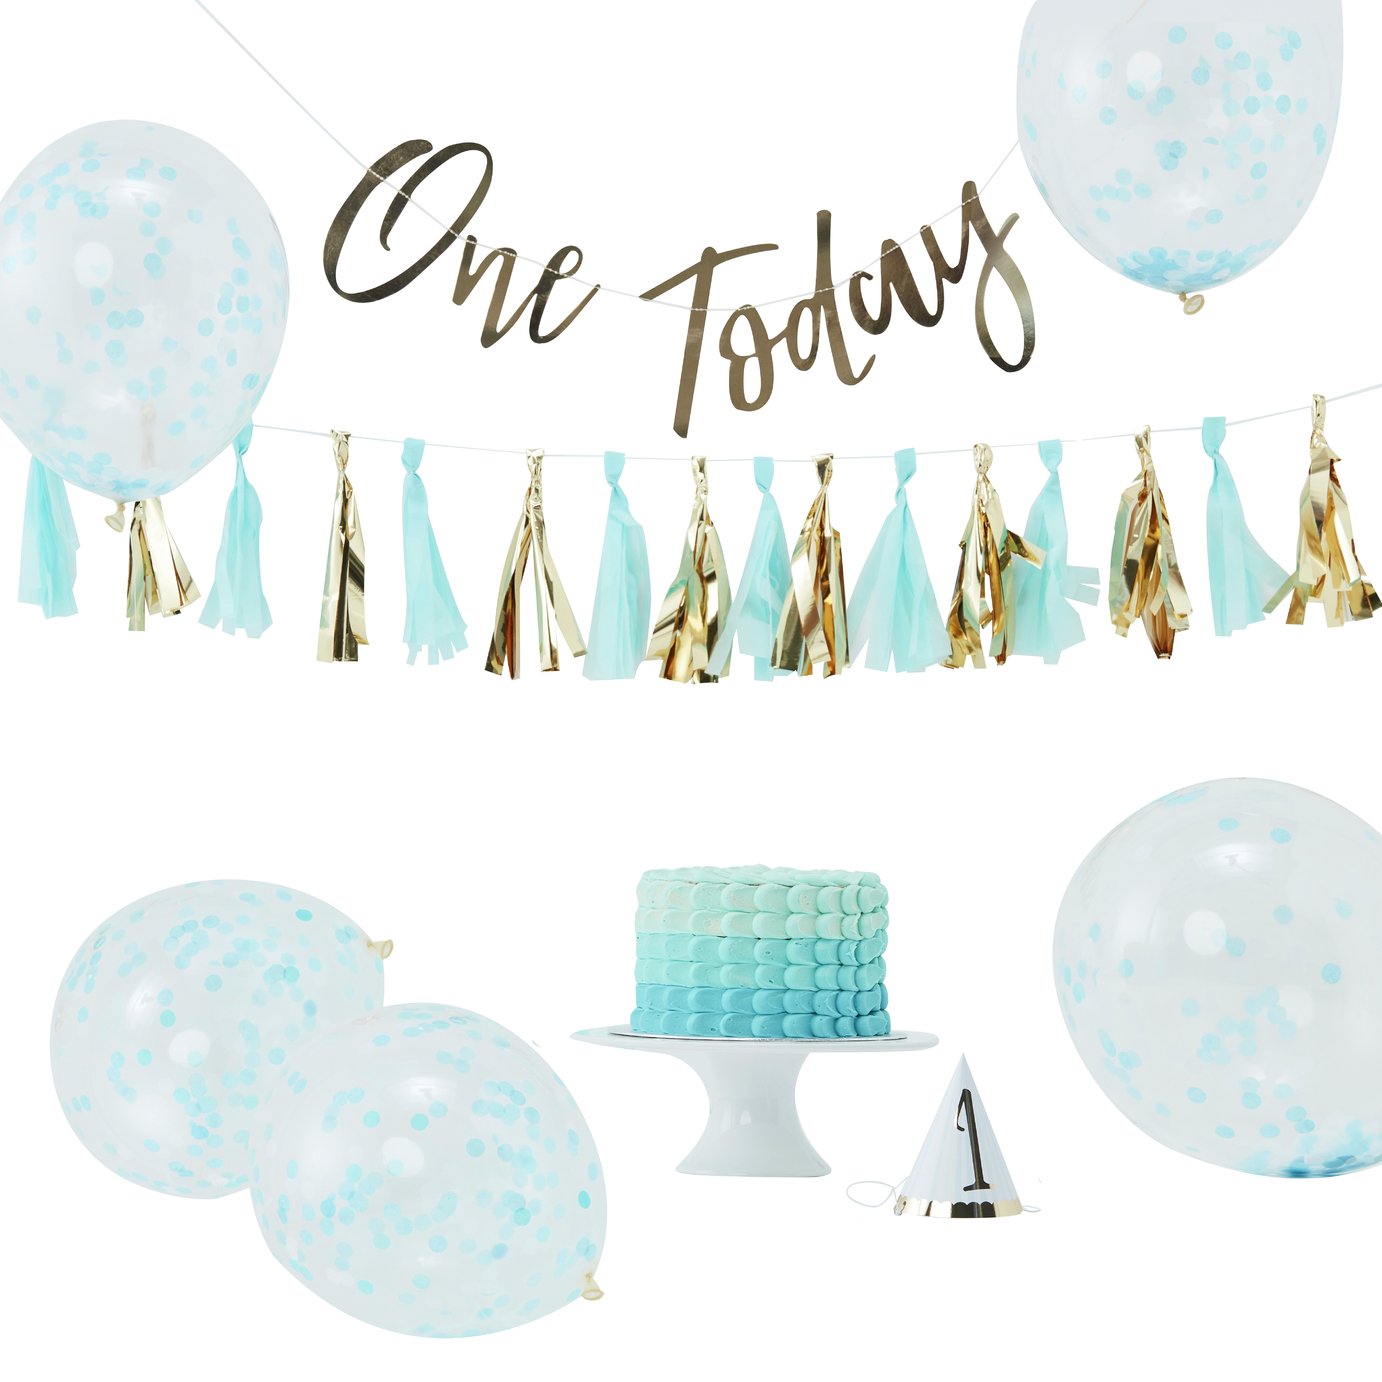 Ginger Ray 1st Birthday Cake Smash Party Decorations - Blue